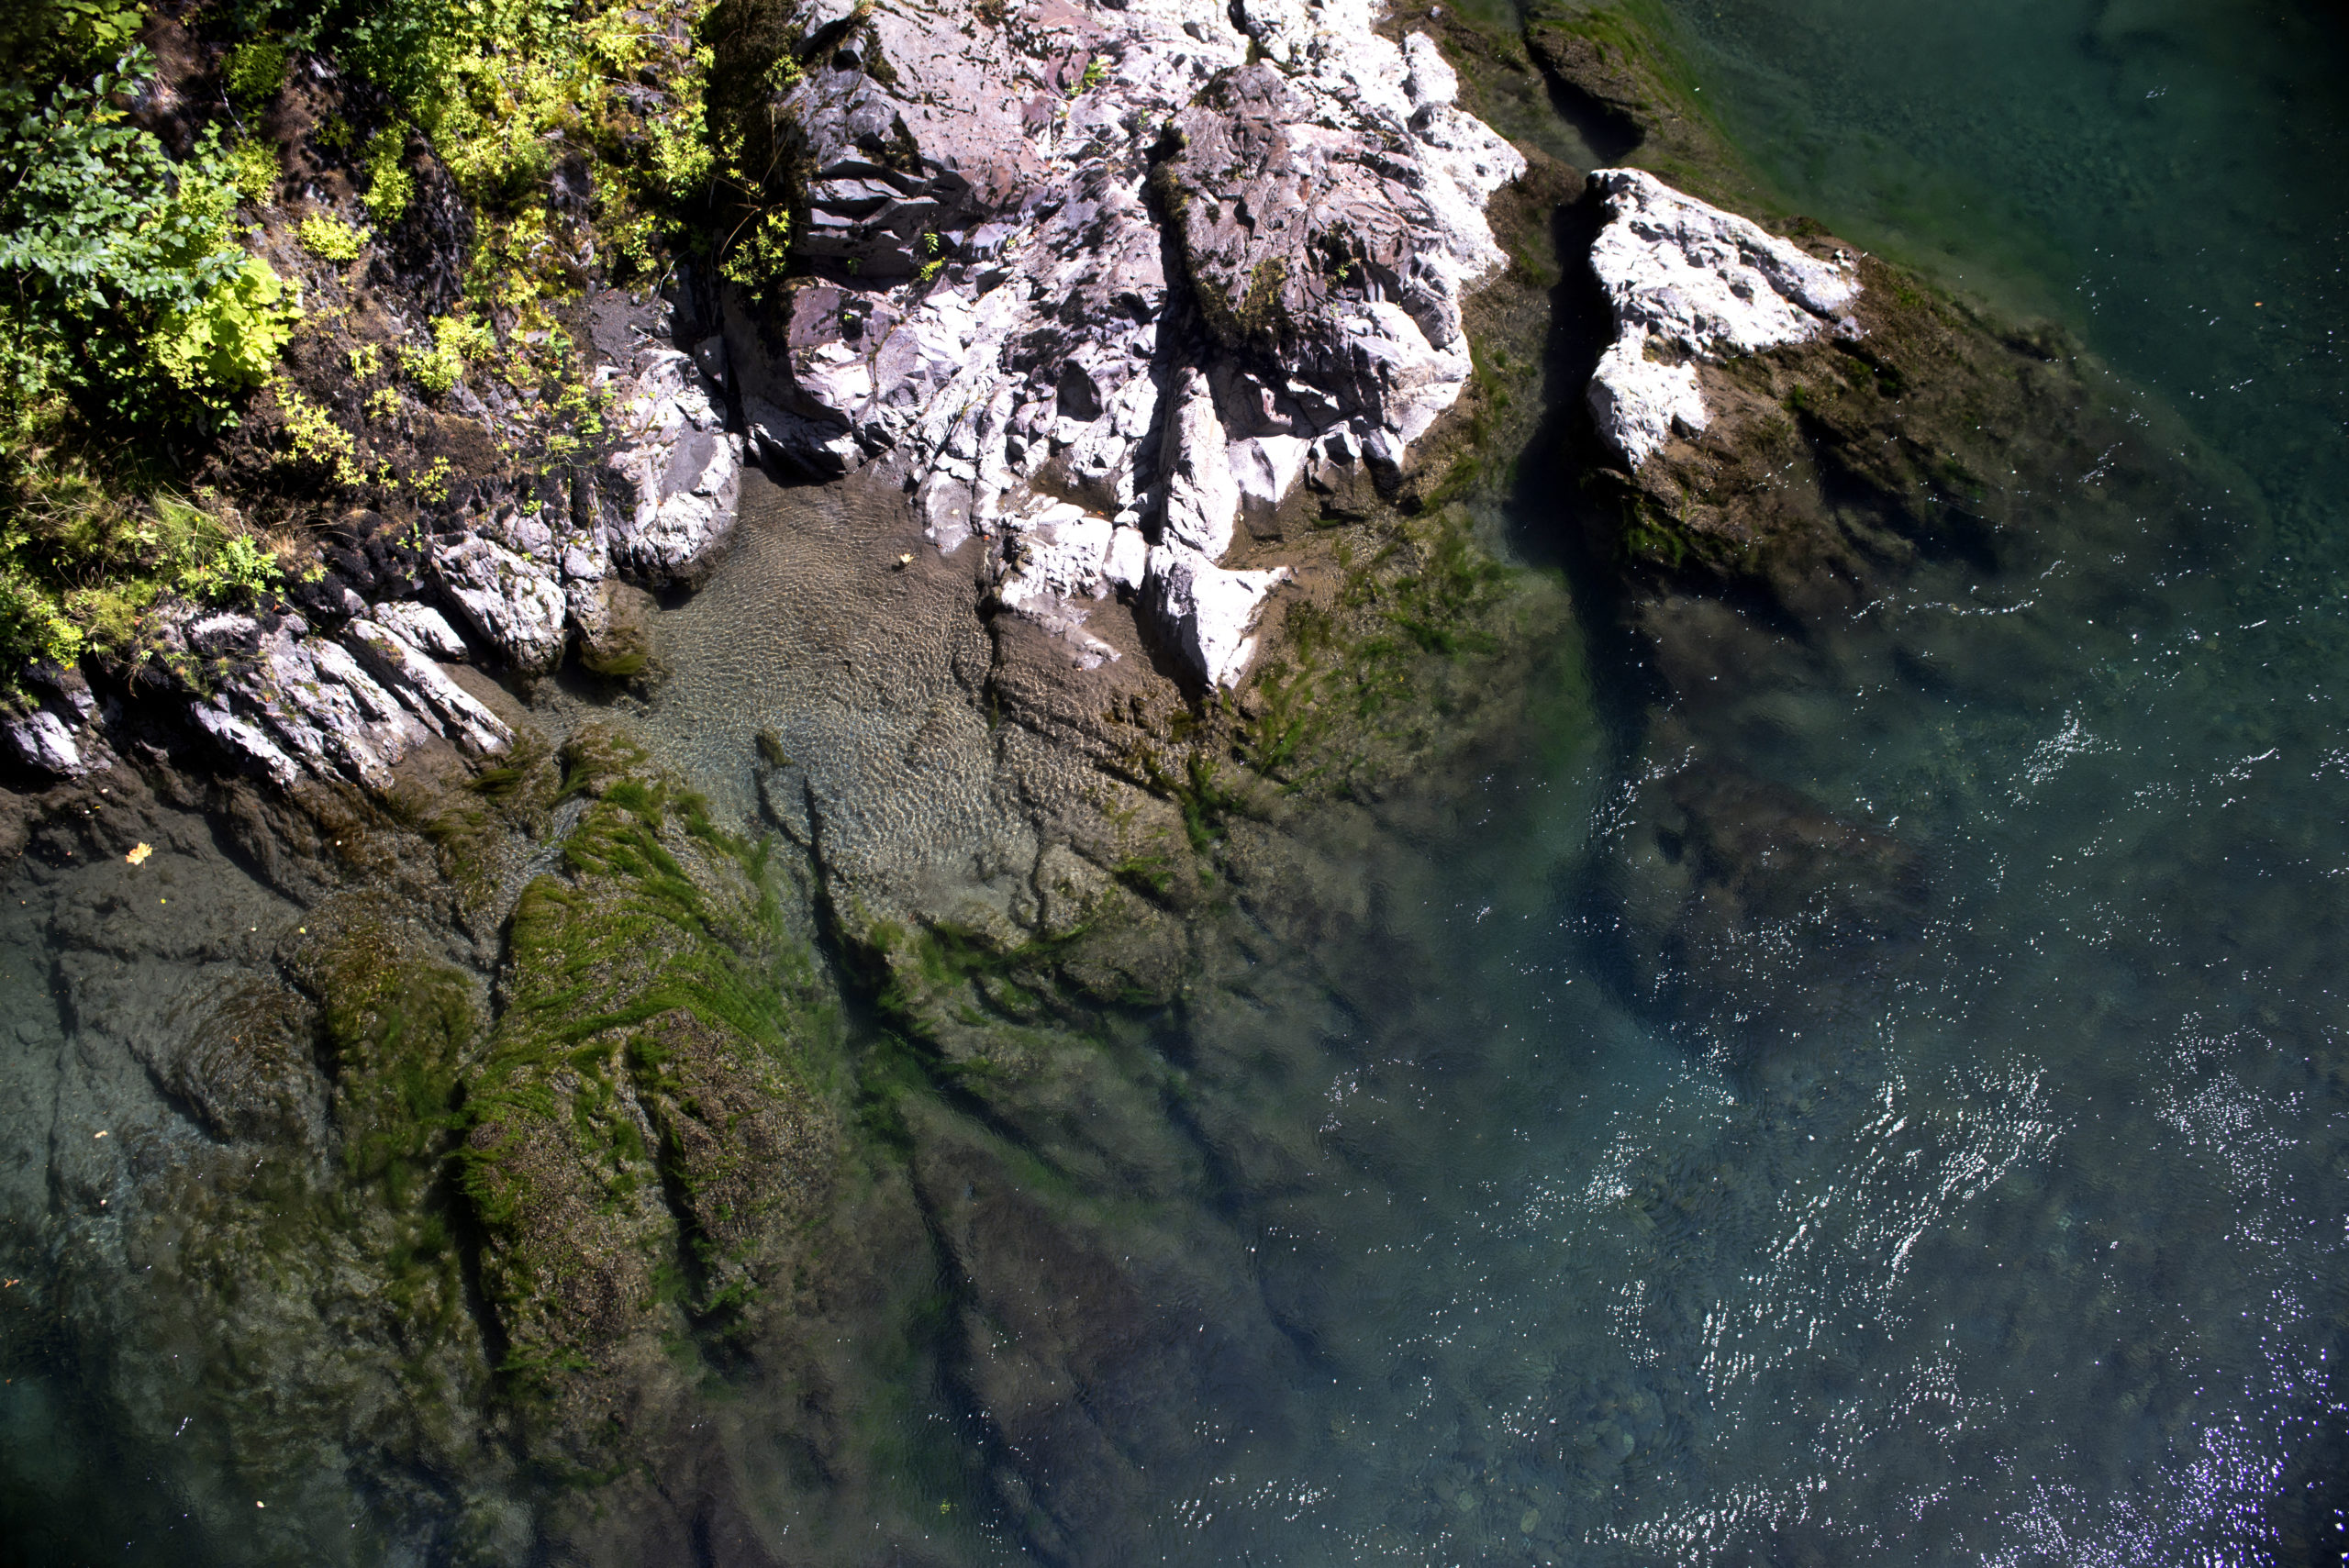 An overhead view of the Glines Overlook, with a shot of where the river meets a rocky moss bank.